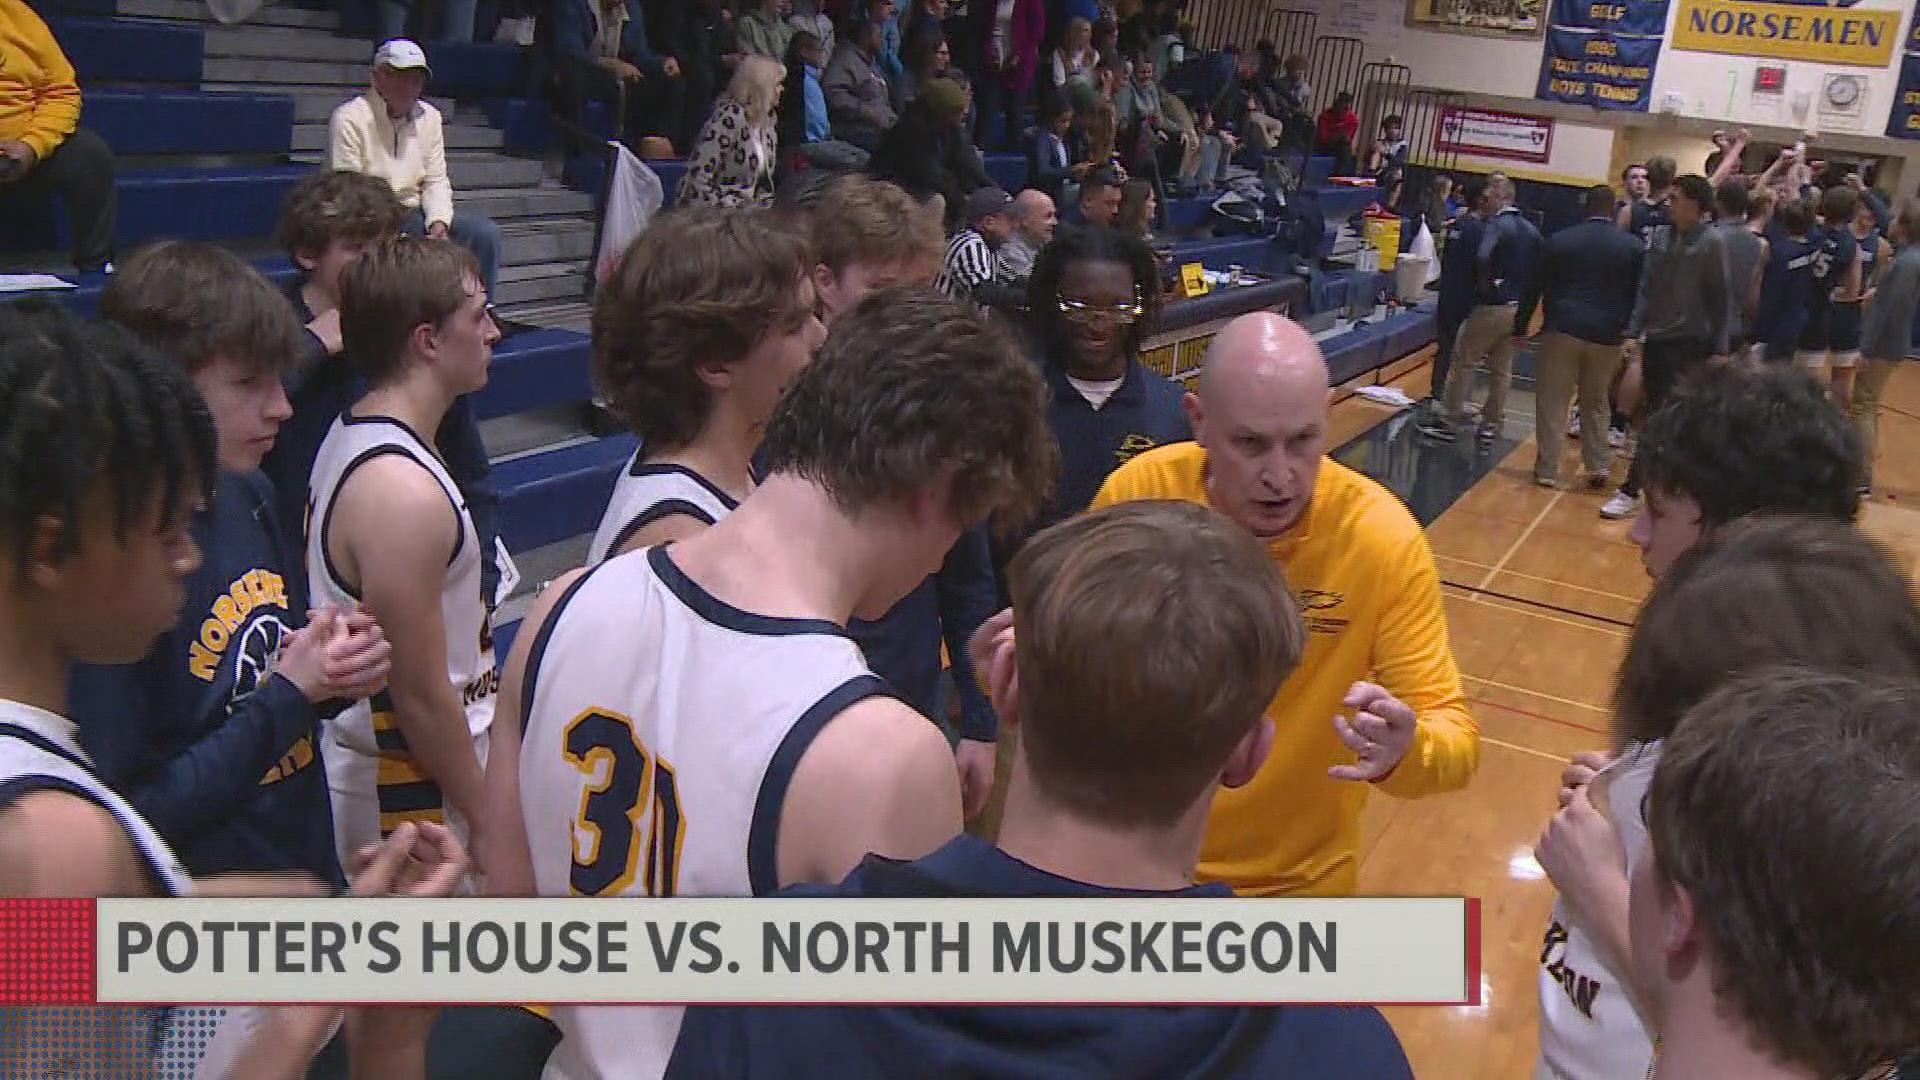 Despite the game coming quite close, North Muskegon proves to be too much in the end, going home with the wind.